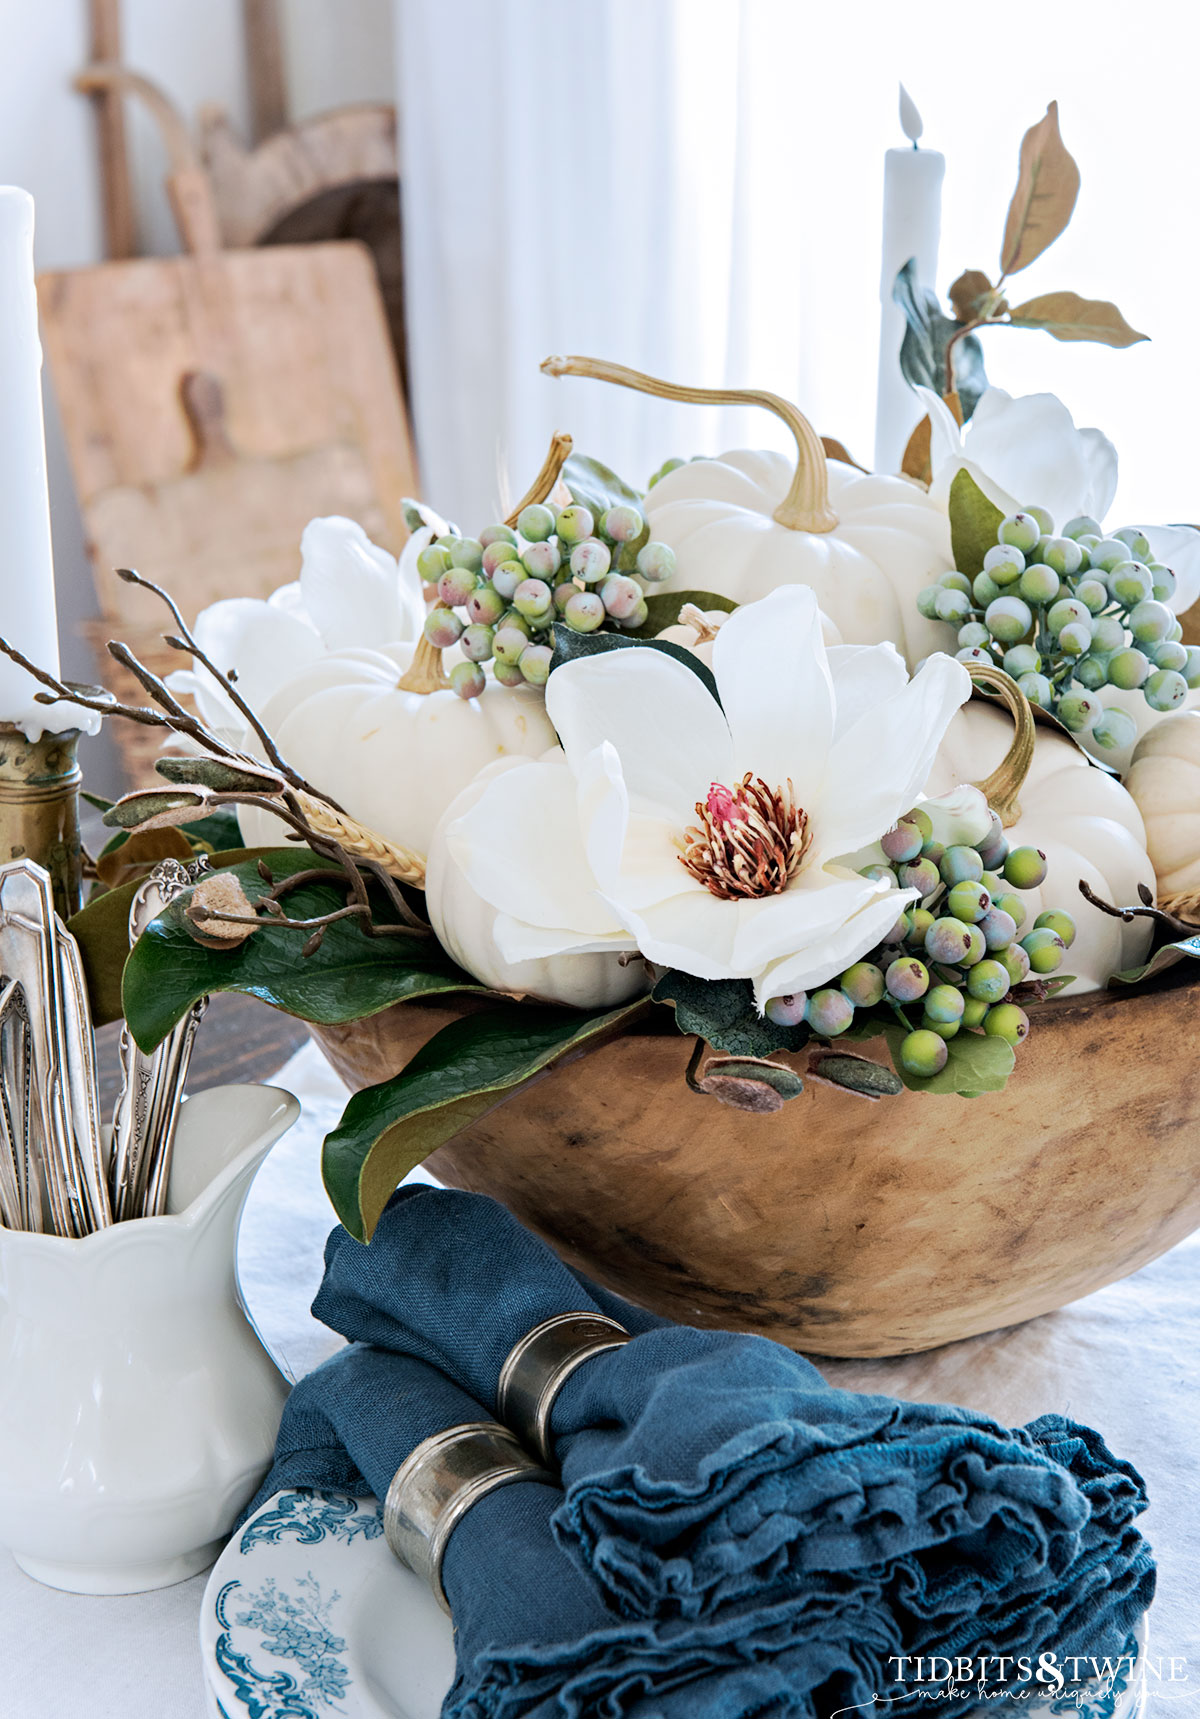 dough bowl centerpiece with white pumpkins and magnolia flowers with blue ruffle napkins and utensiles at base of bowl